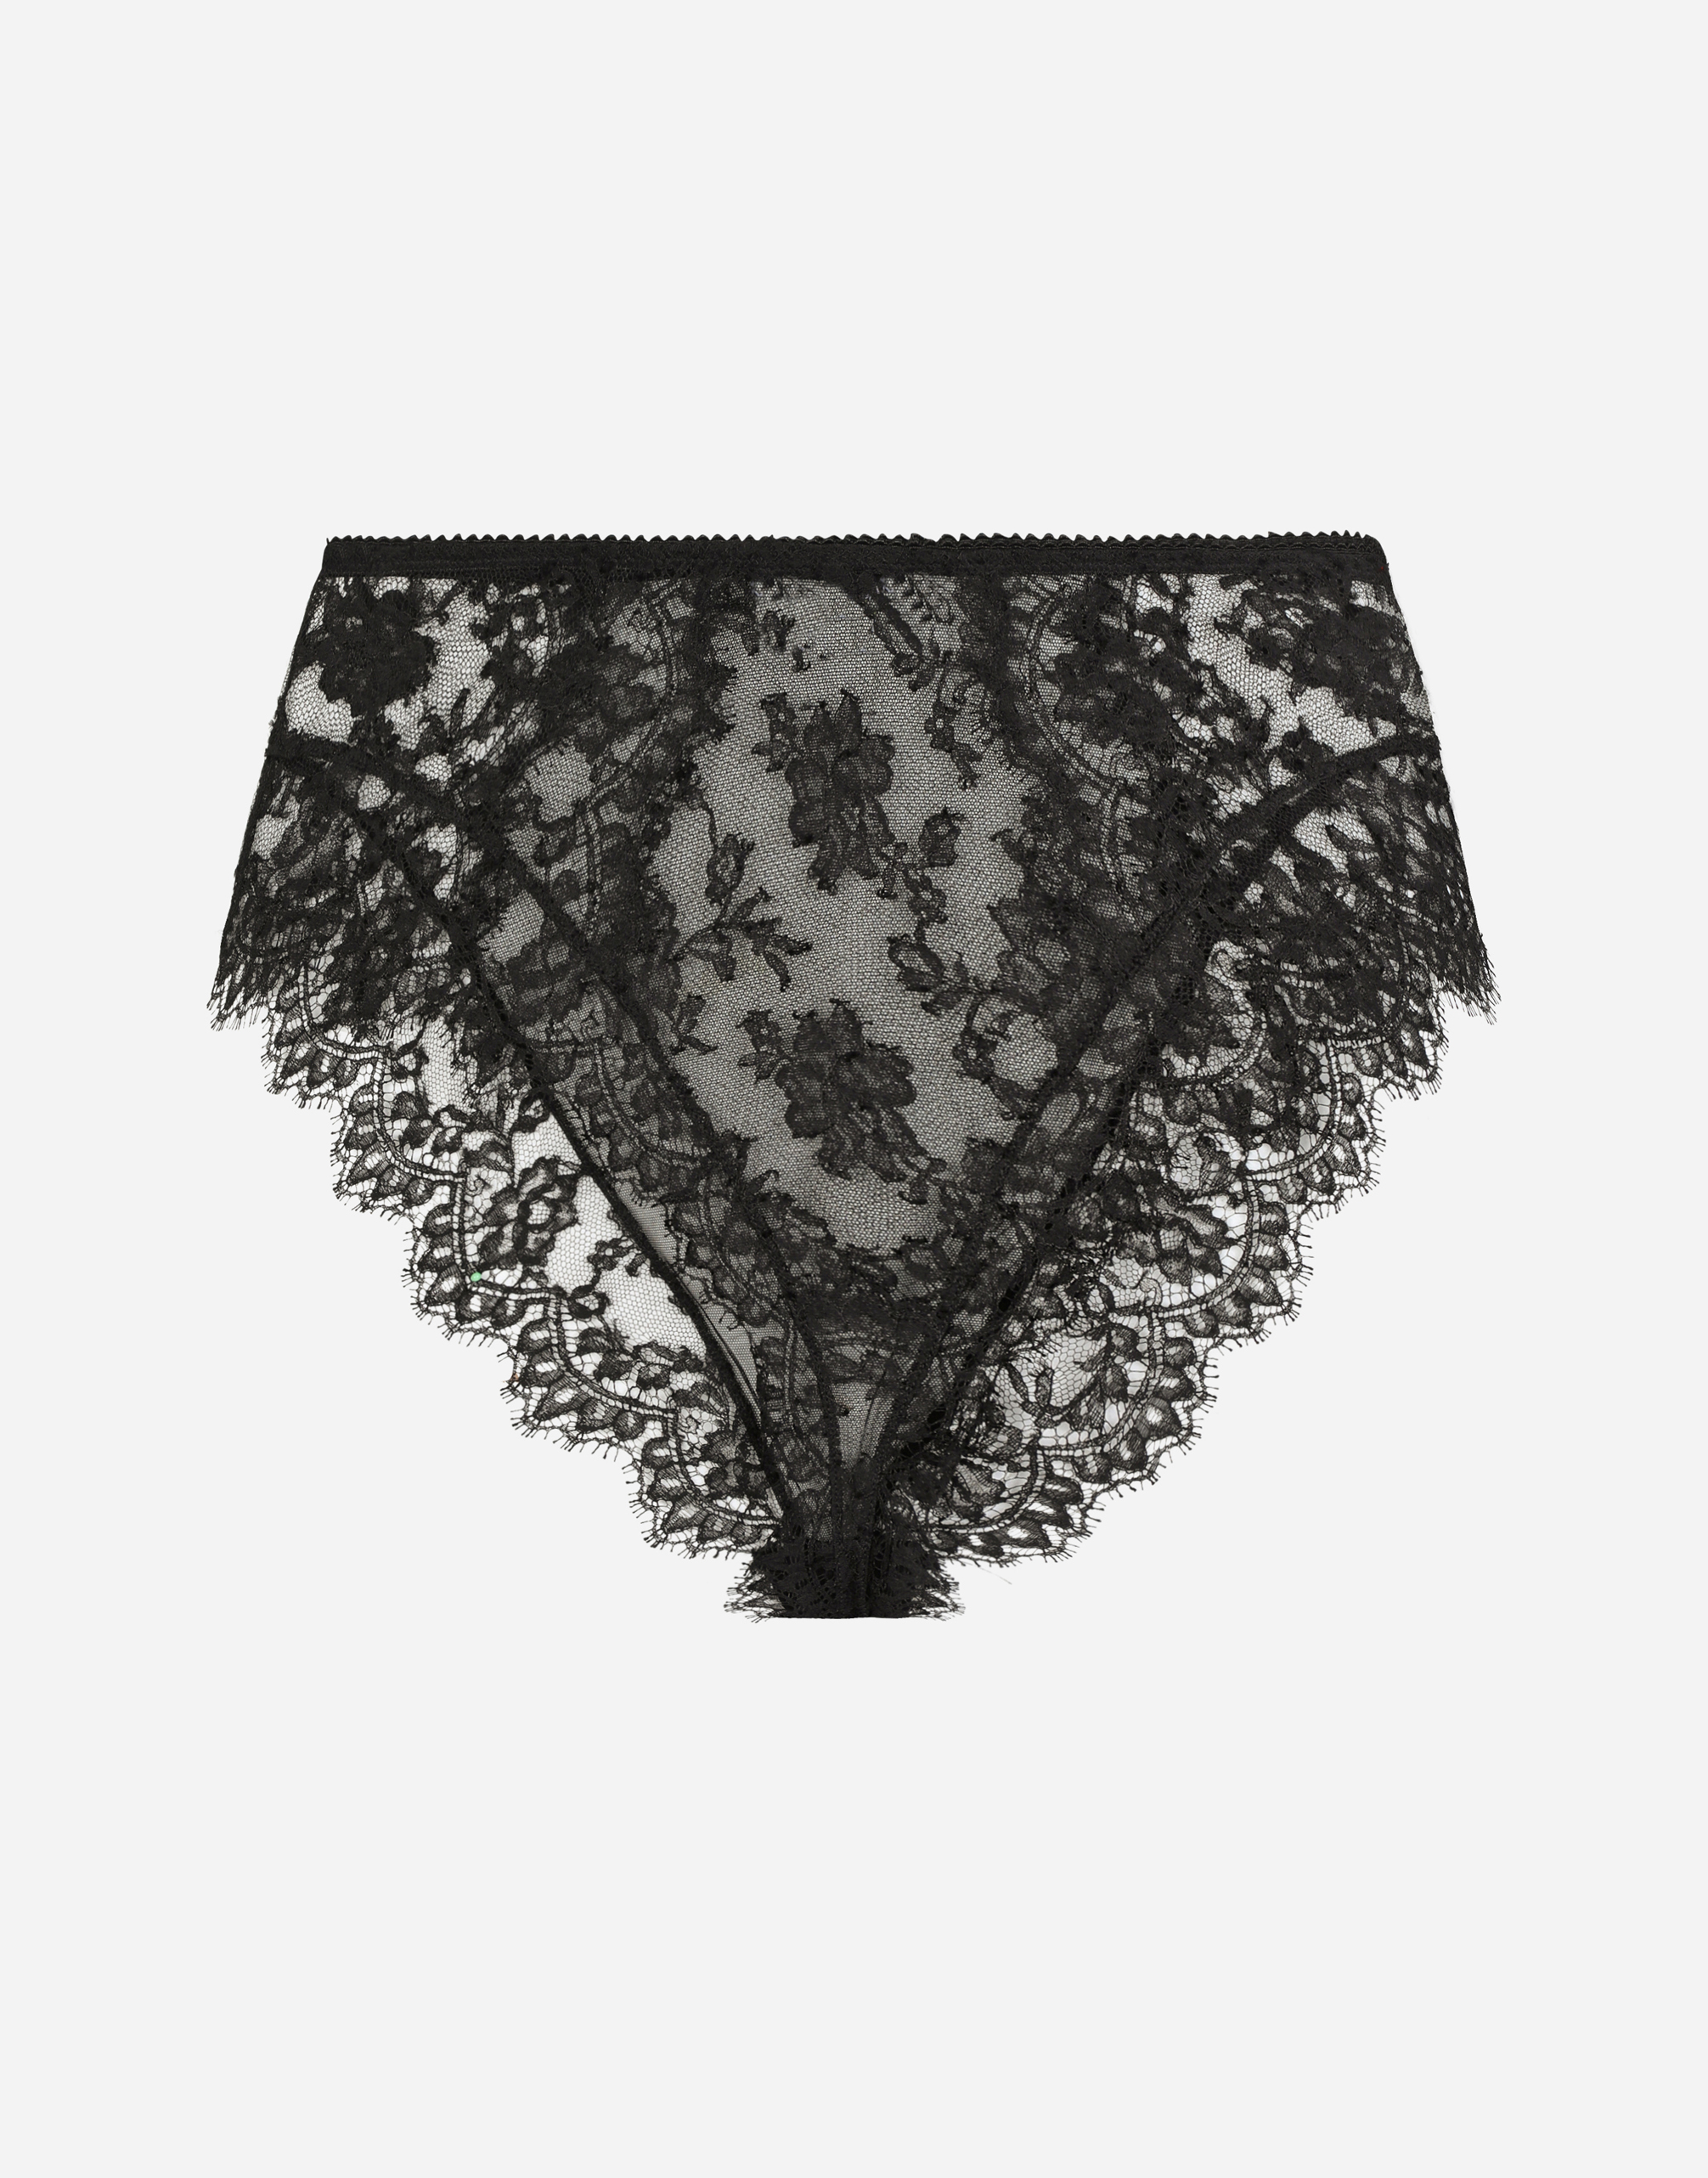 High-waisted lace briefs in Black